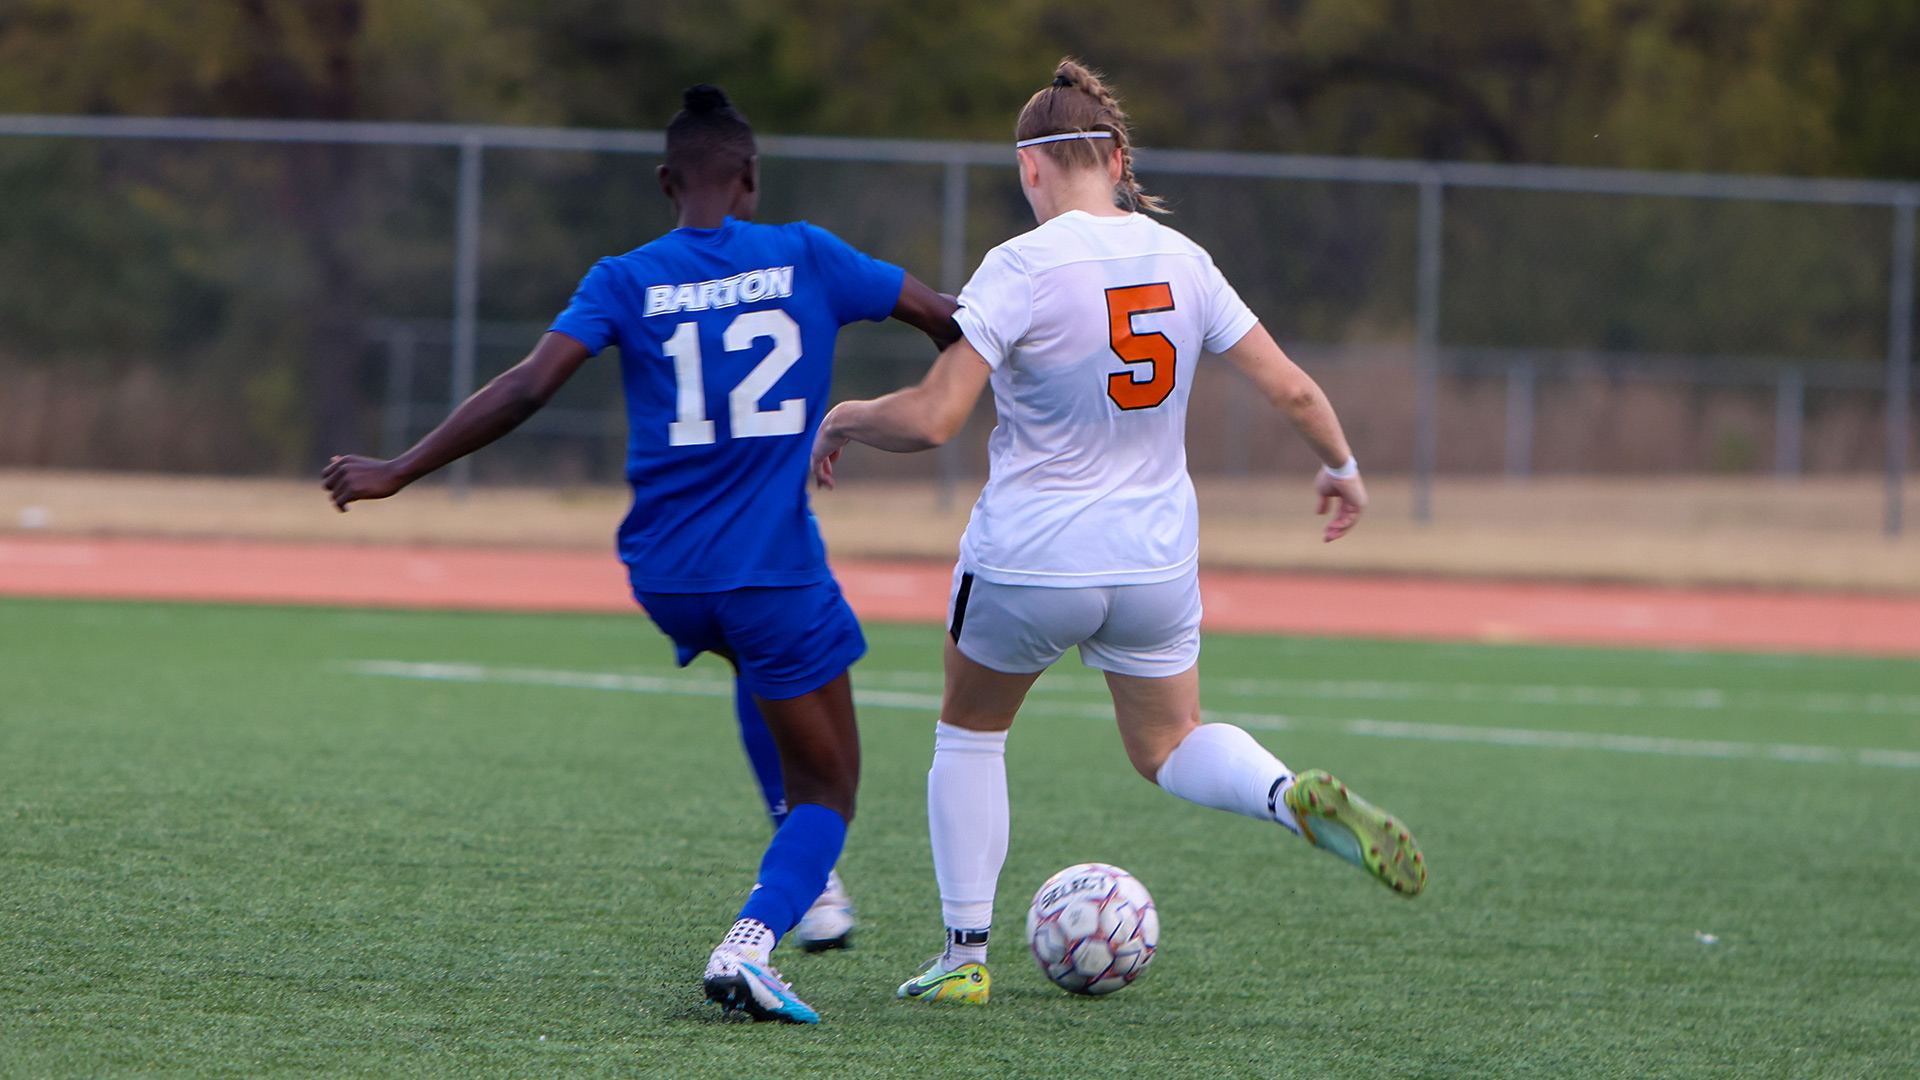 Kansas City sweeps season-series with Lady Tigers with another one-goal victory